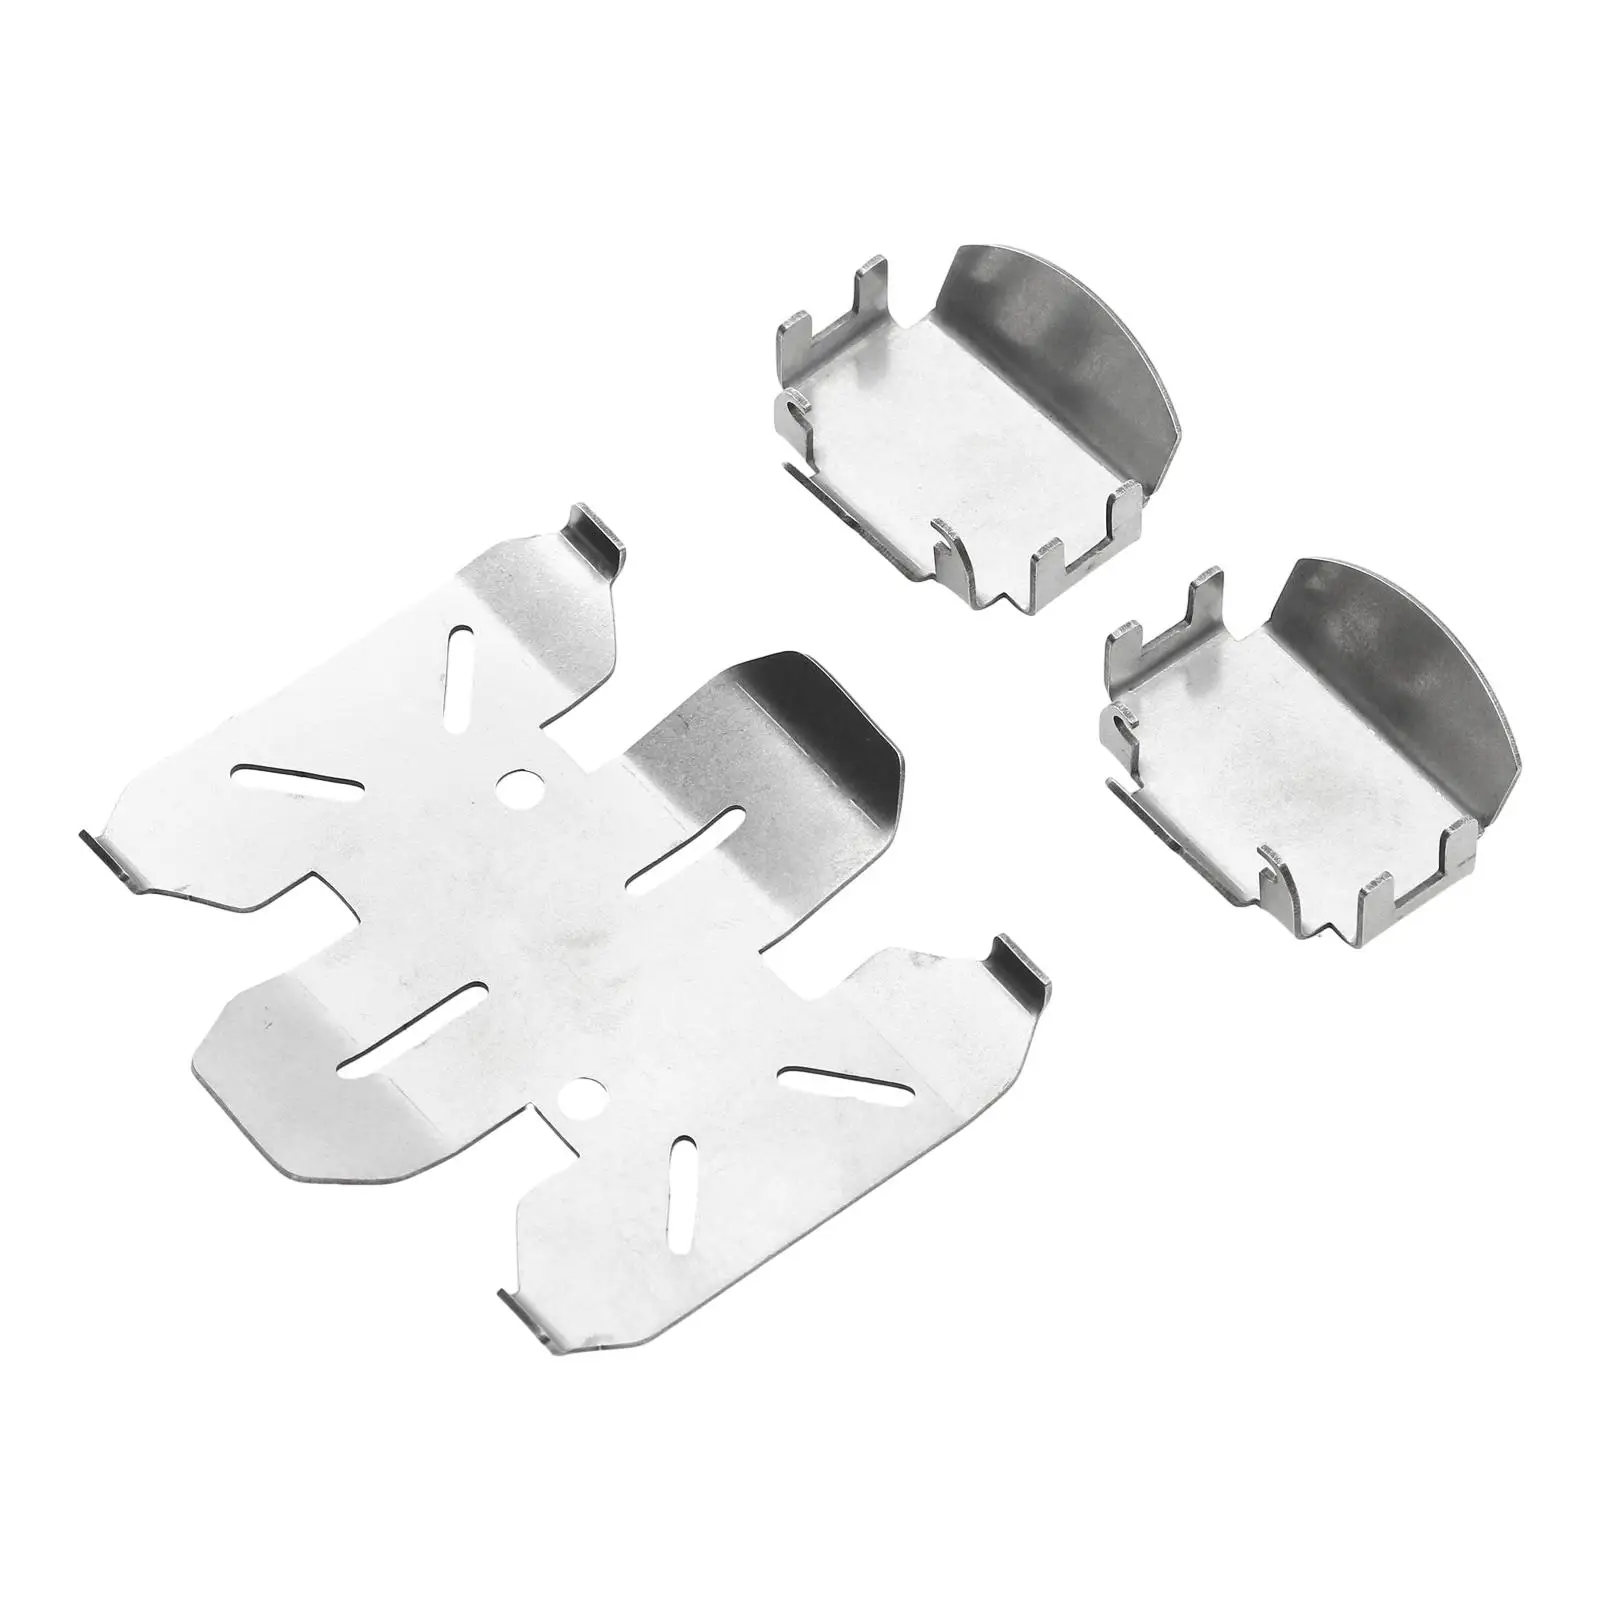 3 Pieces Chassis Protection Plate for 1/10 RC Crawler Car Accessories Parts